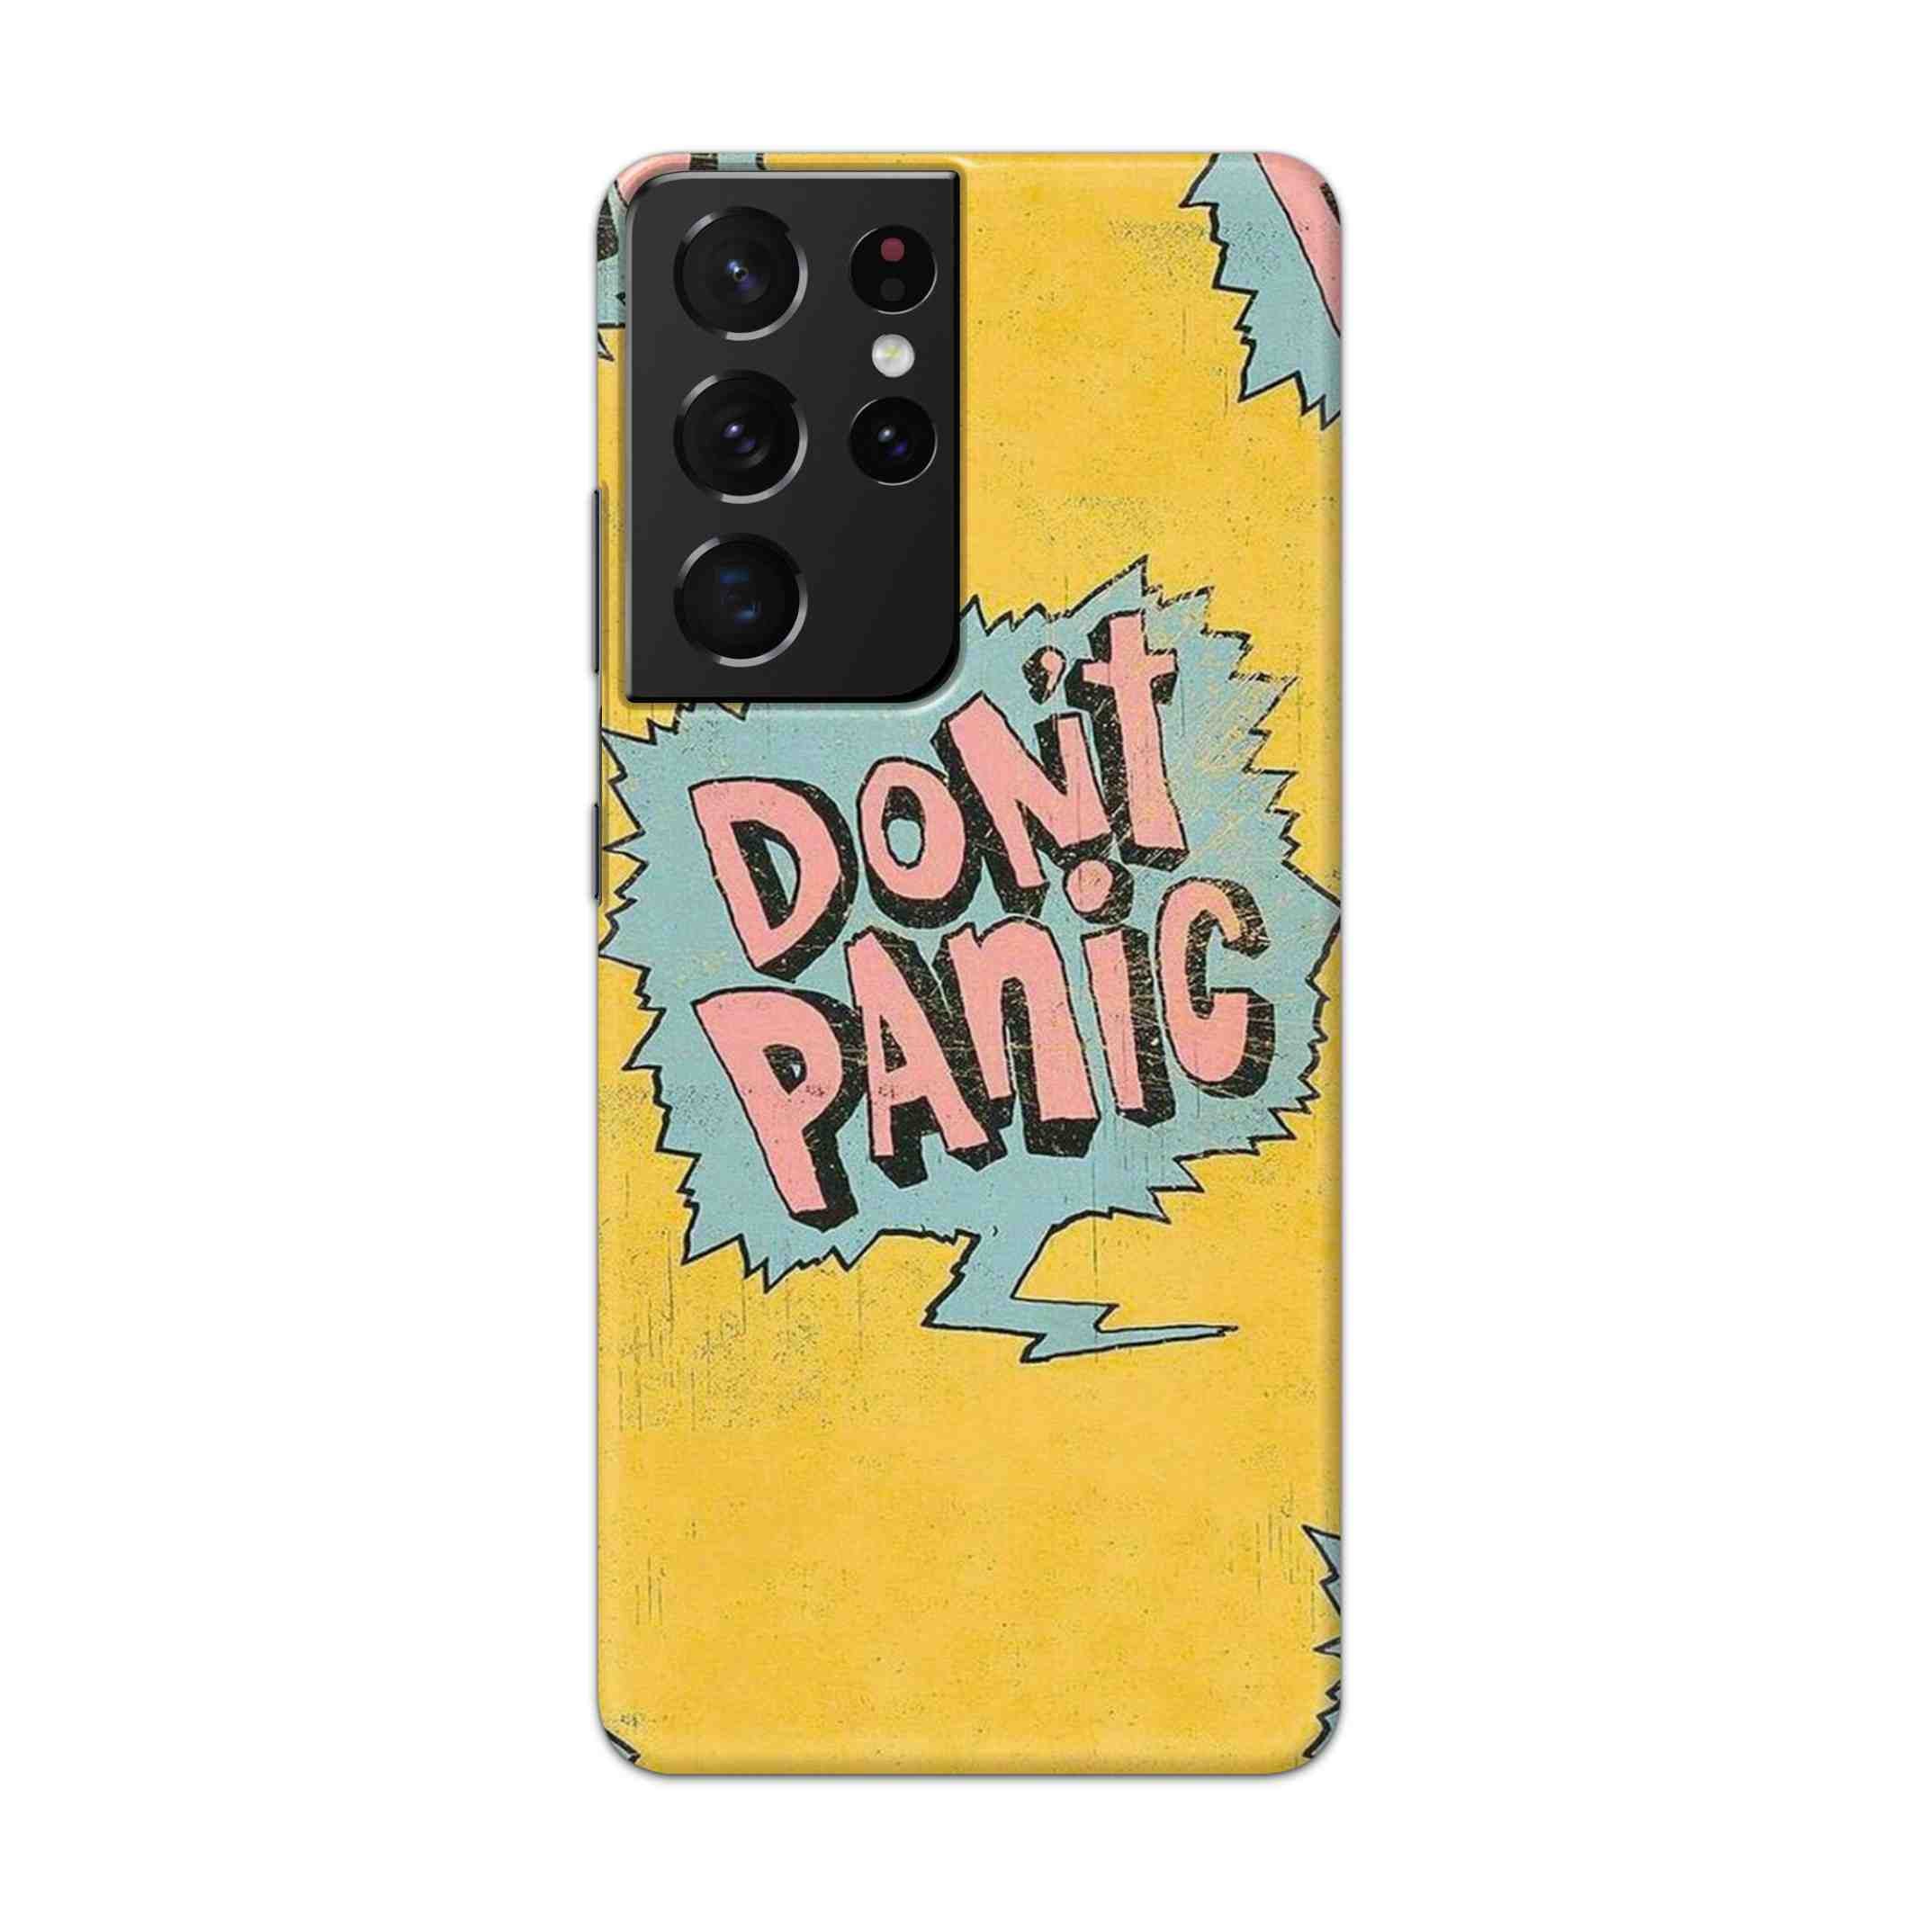 Buy Do Not Panic Hard Back Mobile Phone Case Cover For Samsung Galaxy S21 Ultra Online